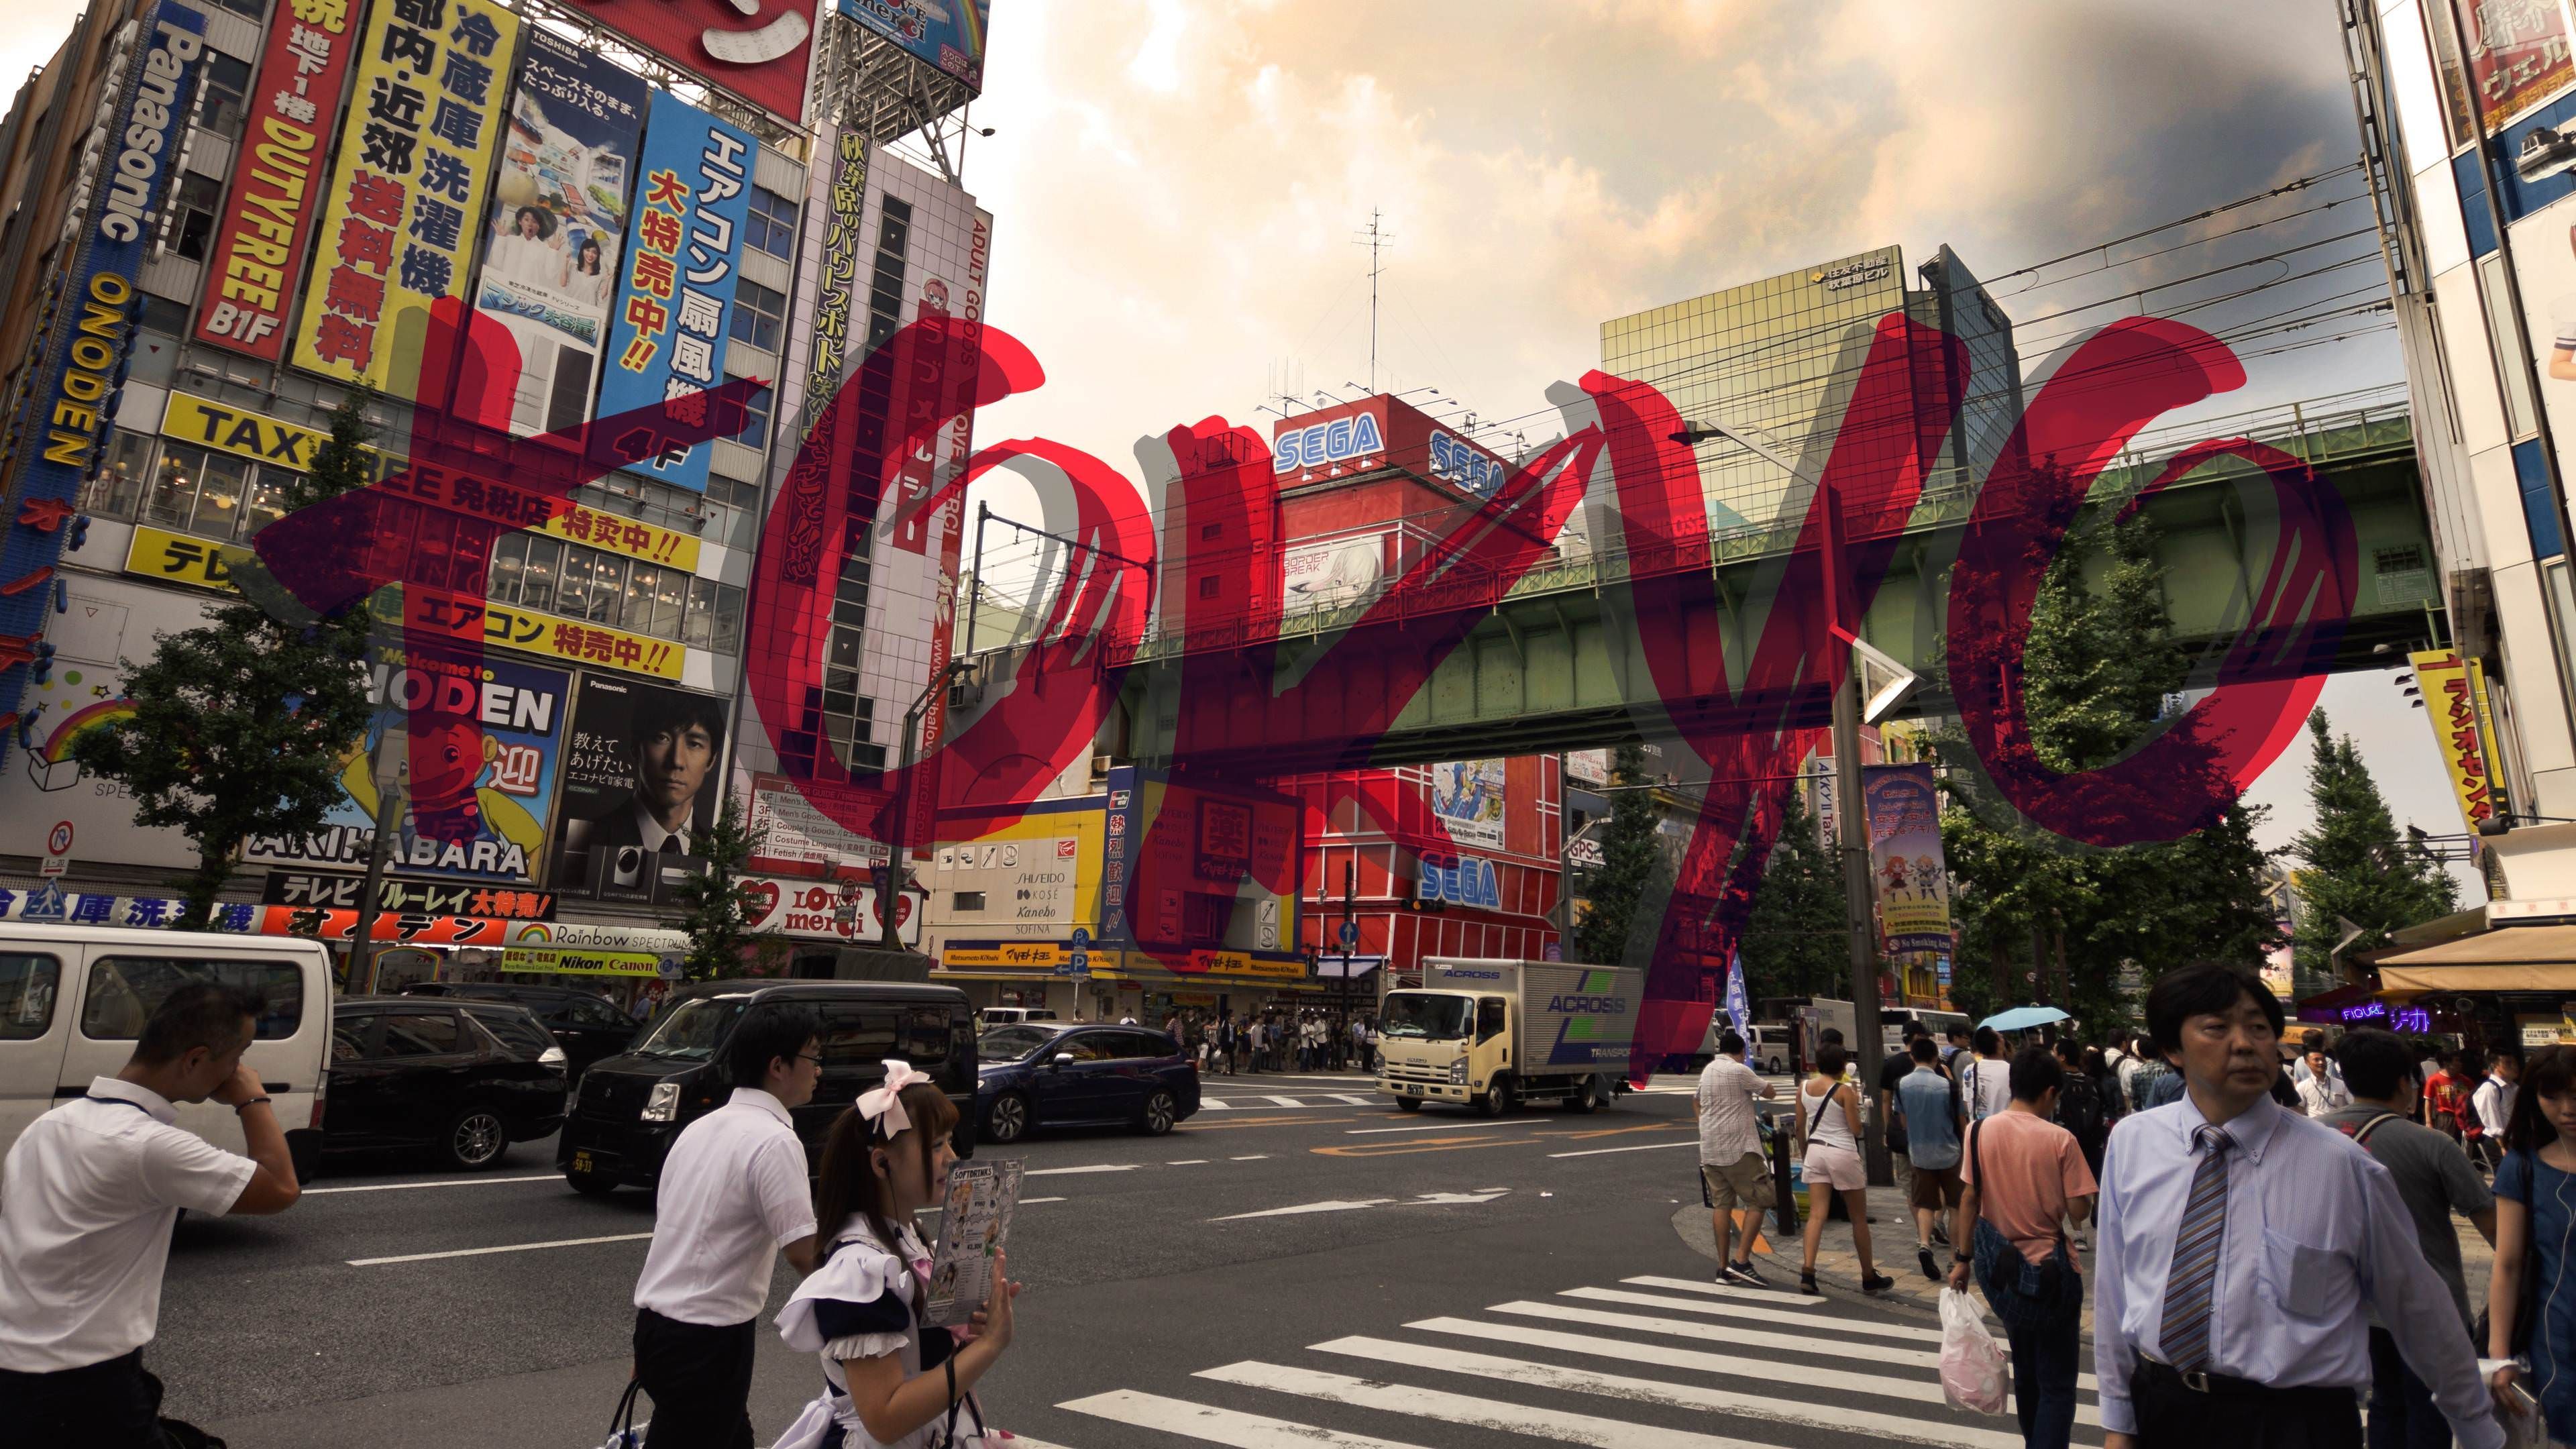 I made this from an old photo from when I was in tokyo. Old